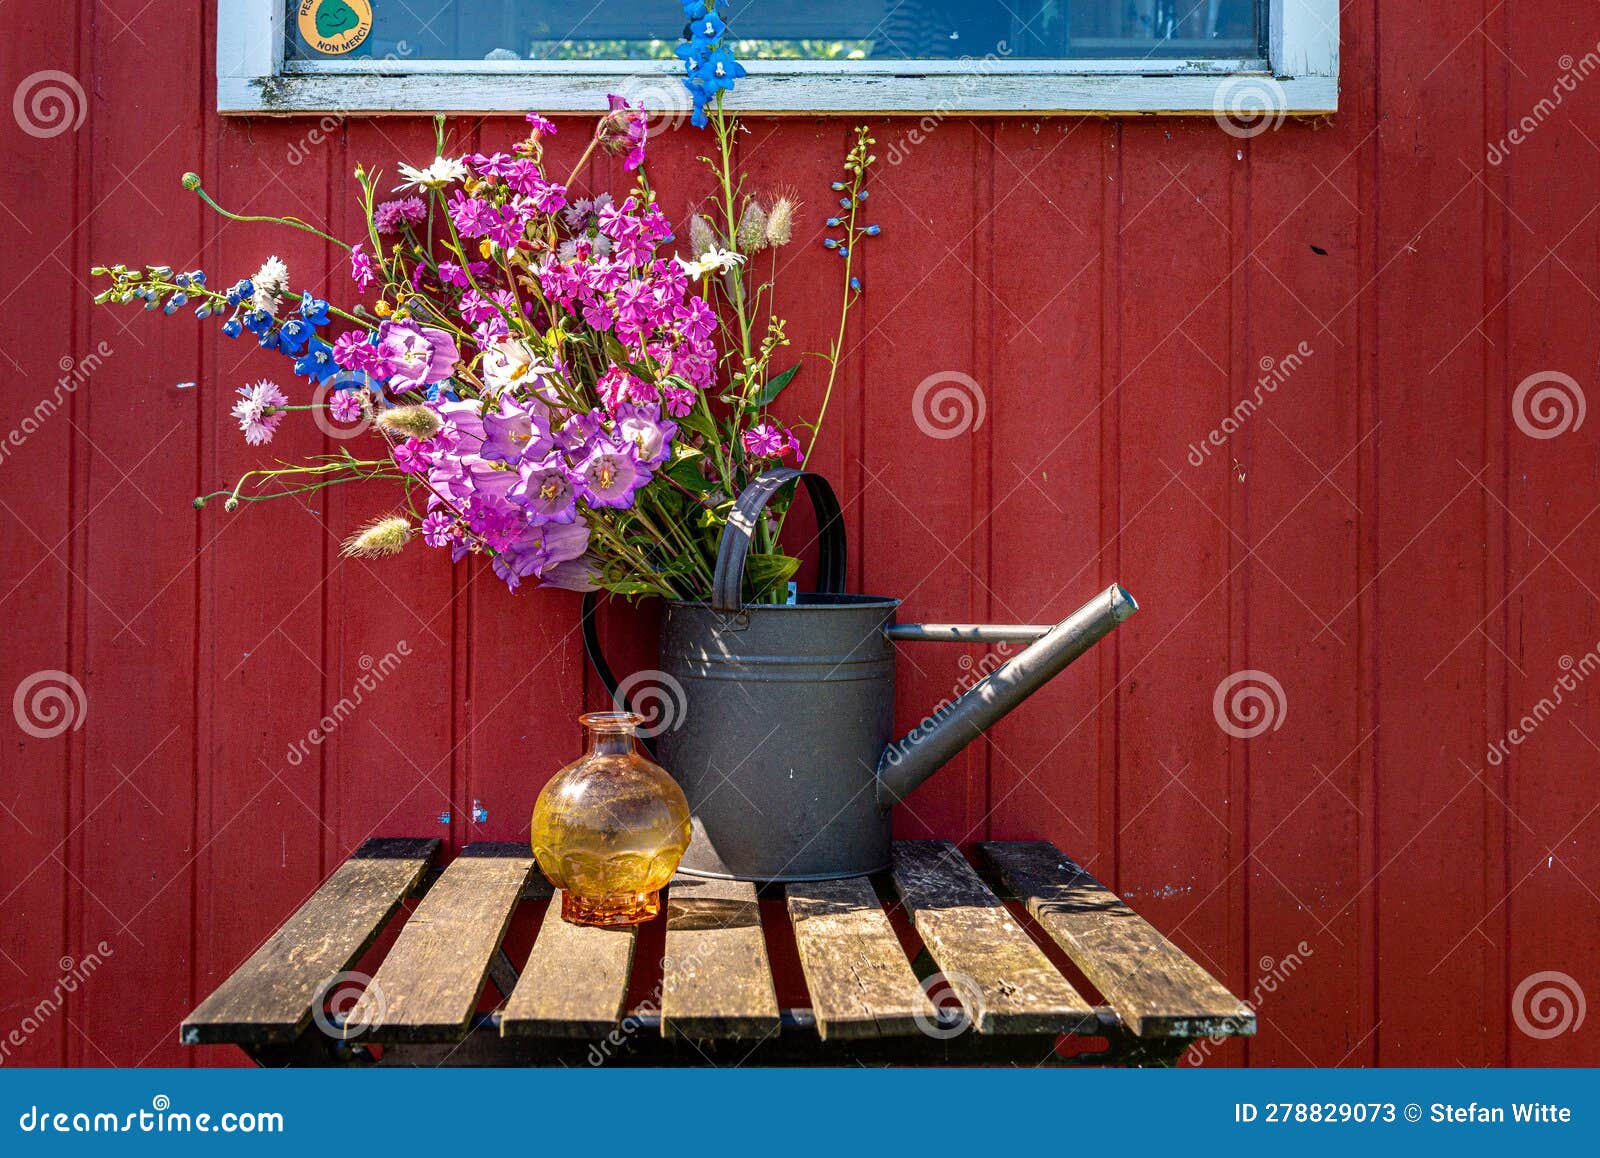 bouquet of summerflowers stillife on a outdoor table